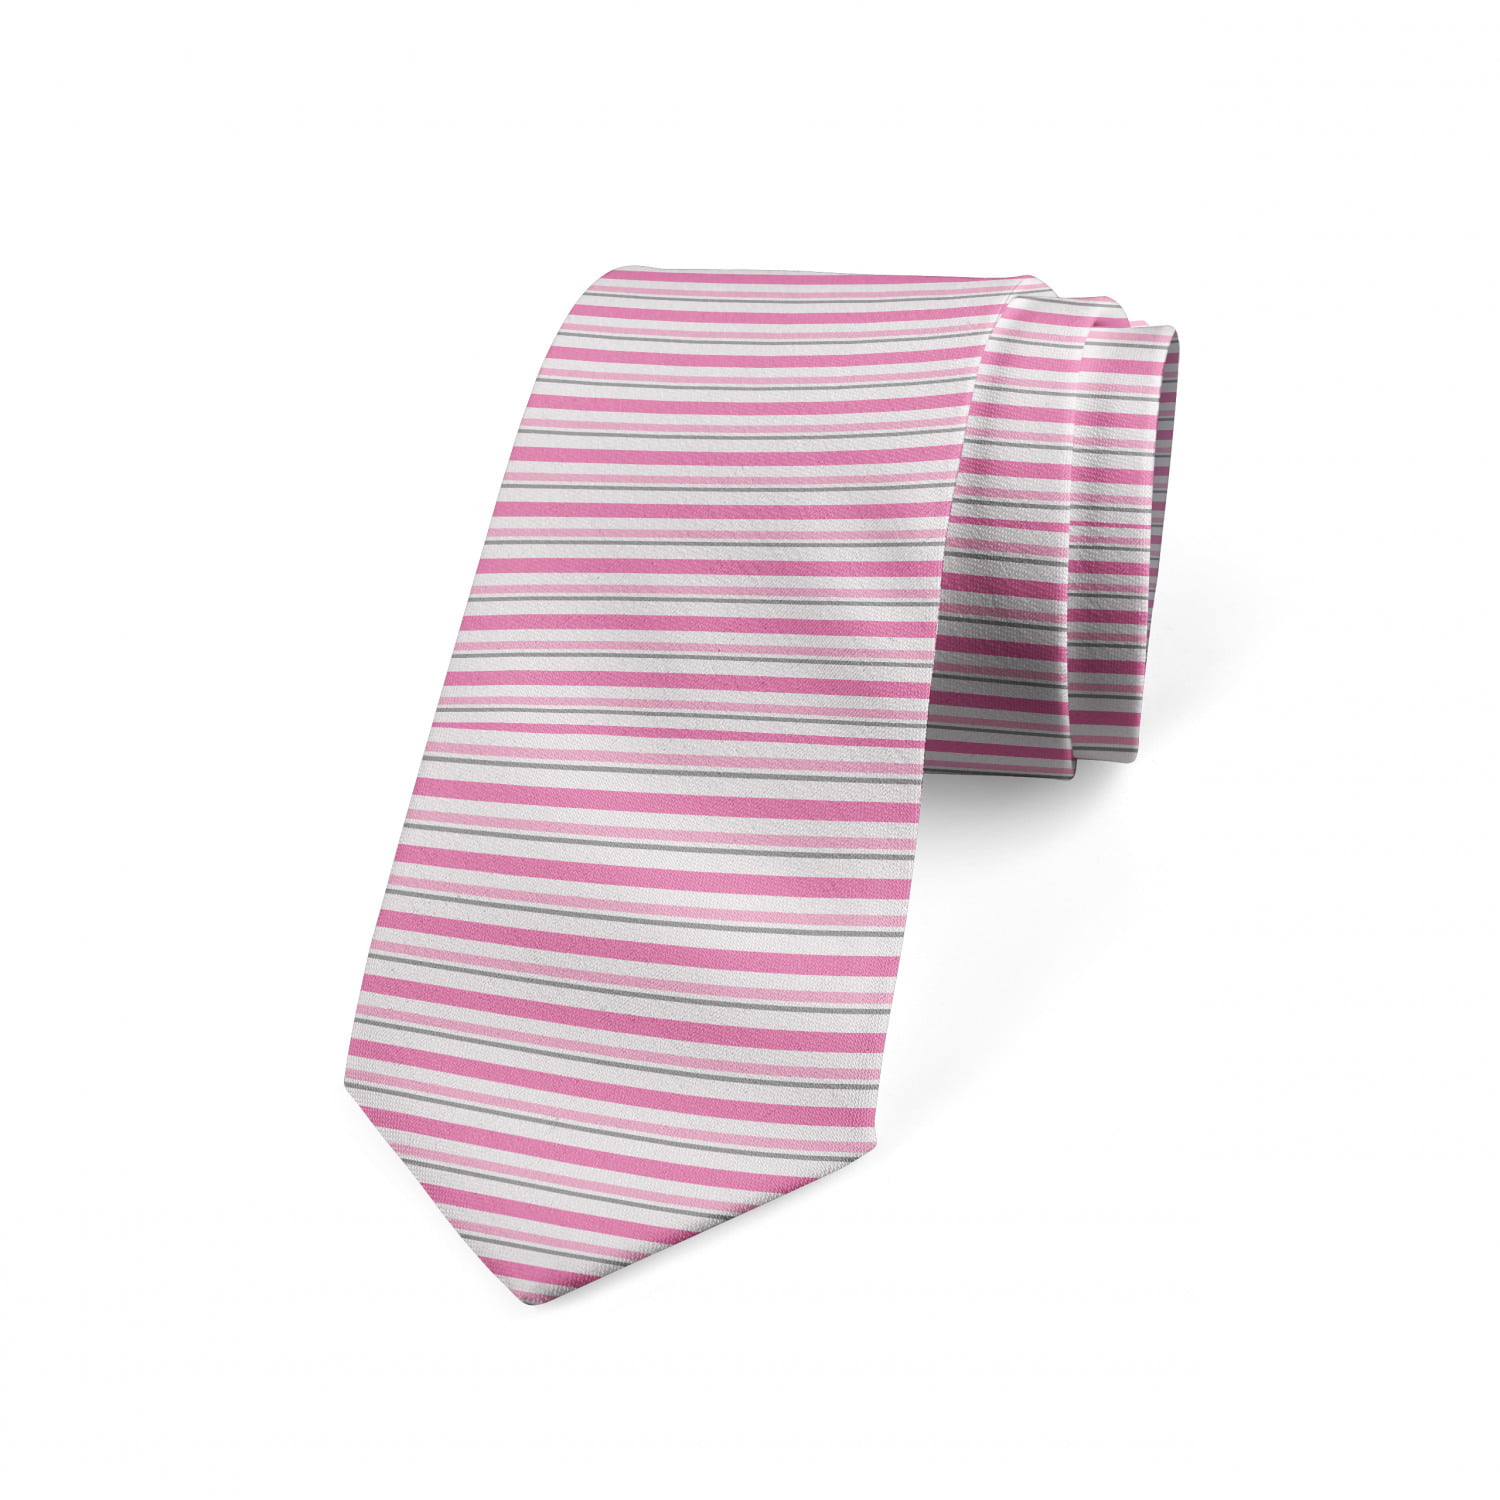 3.7 Charcoal Grey White Pink Contemporary Square Ambesonne Mens Tie